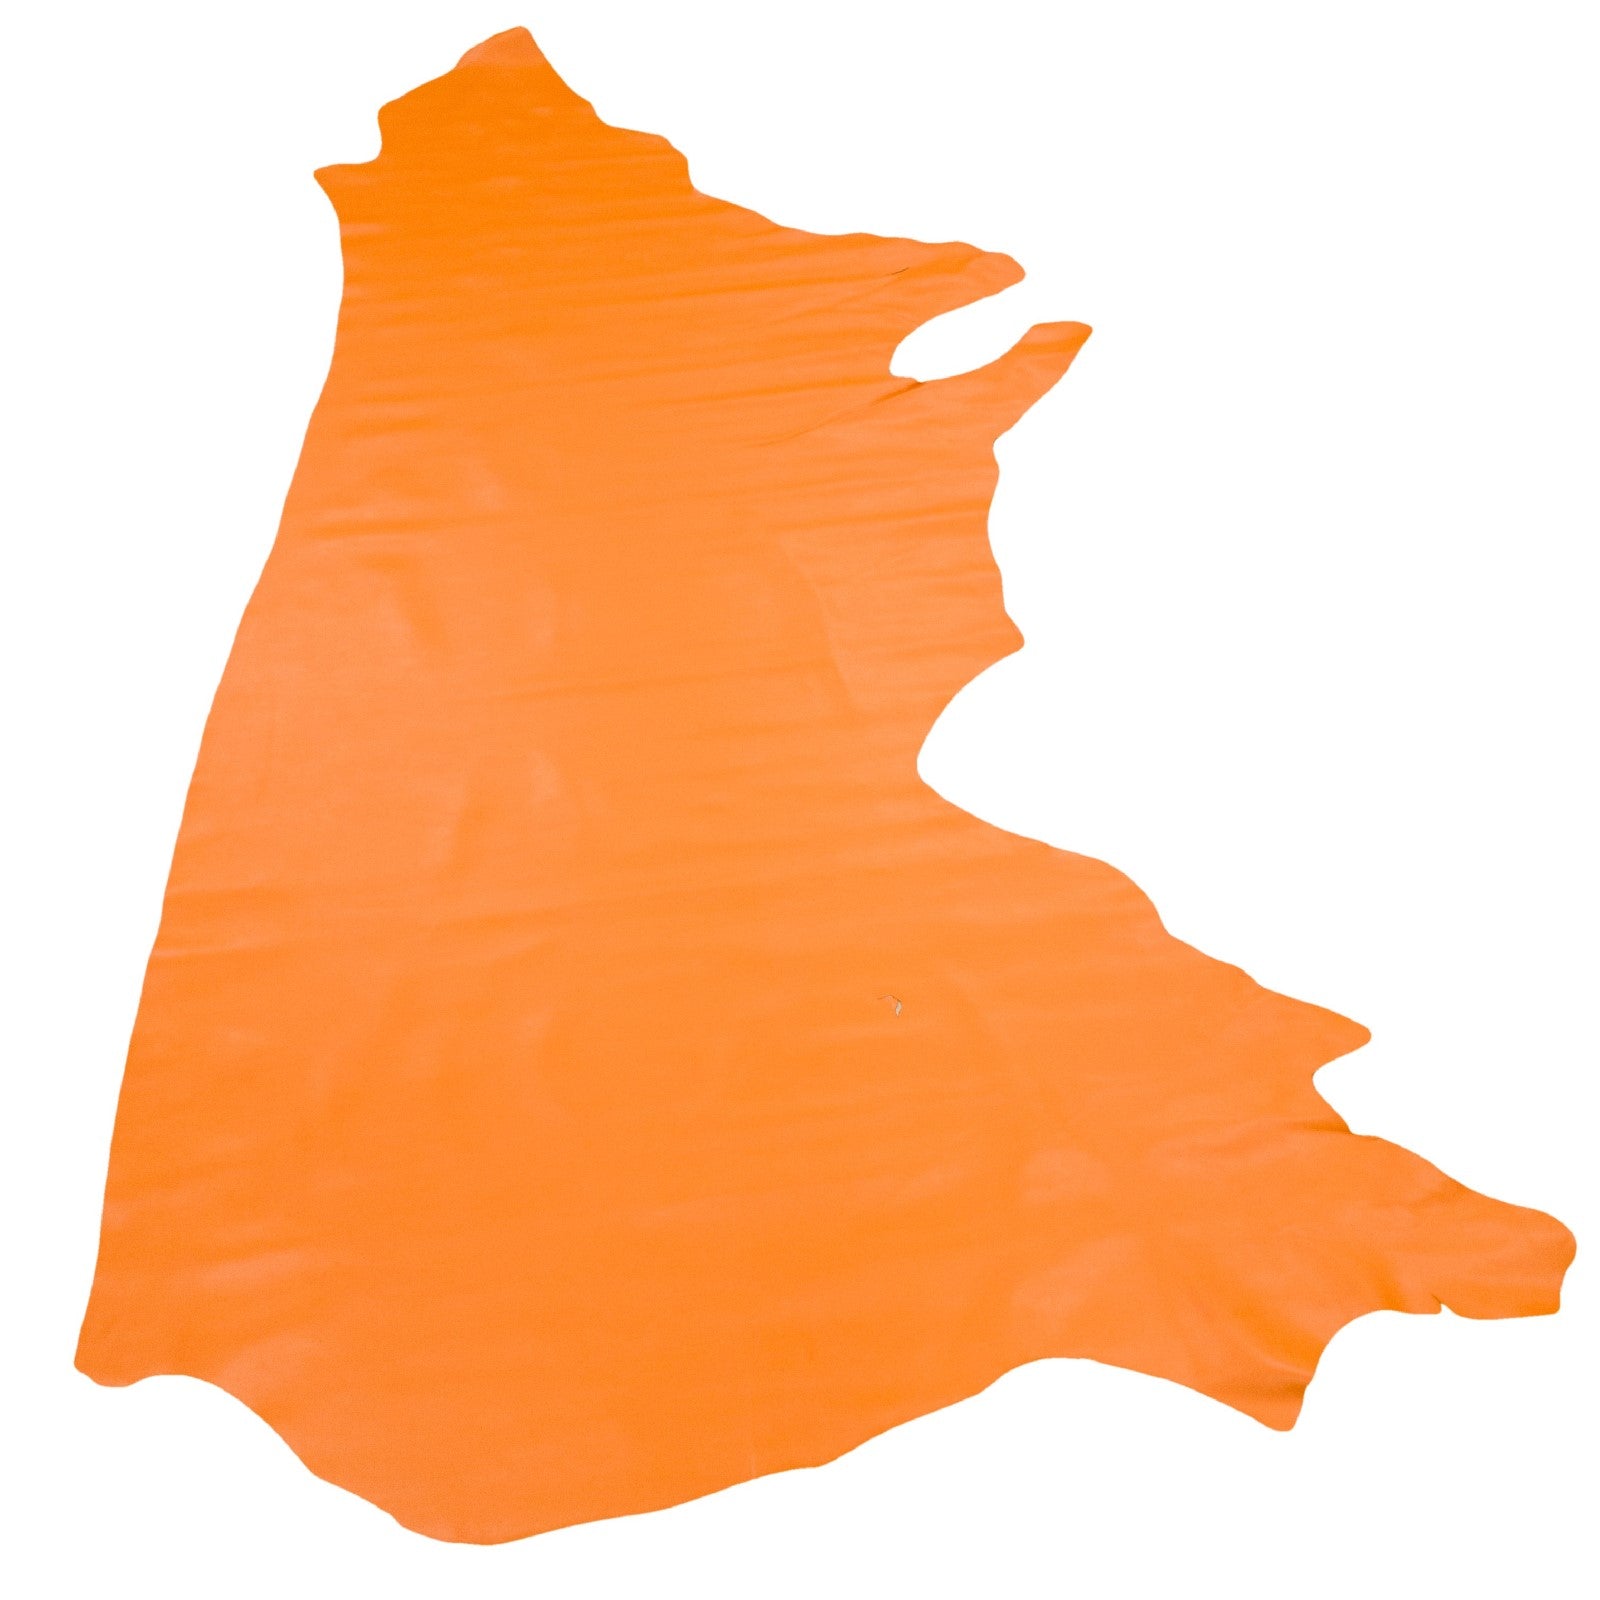 Bronco Orange Crush, 3-3.5 oz Cow Hides, Starting Lineup, Side / 18-20 Sq Ft | The Leather Guy